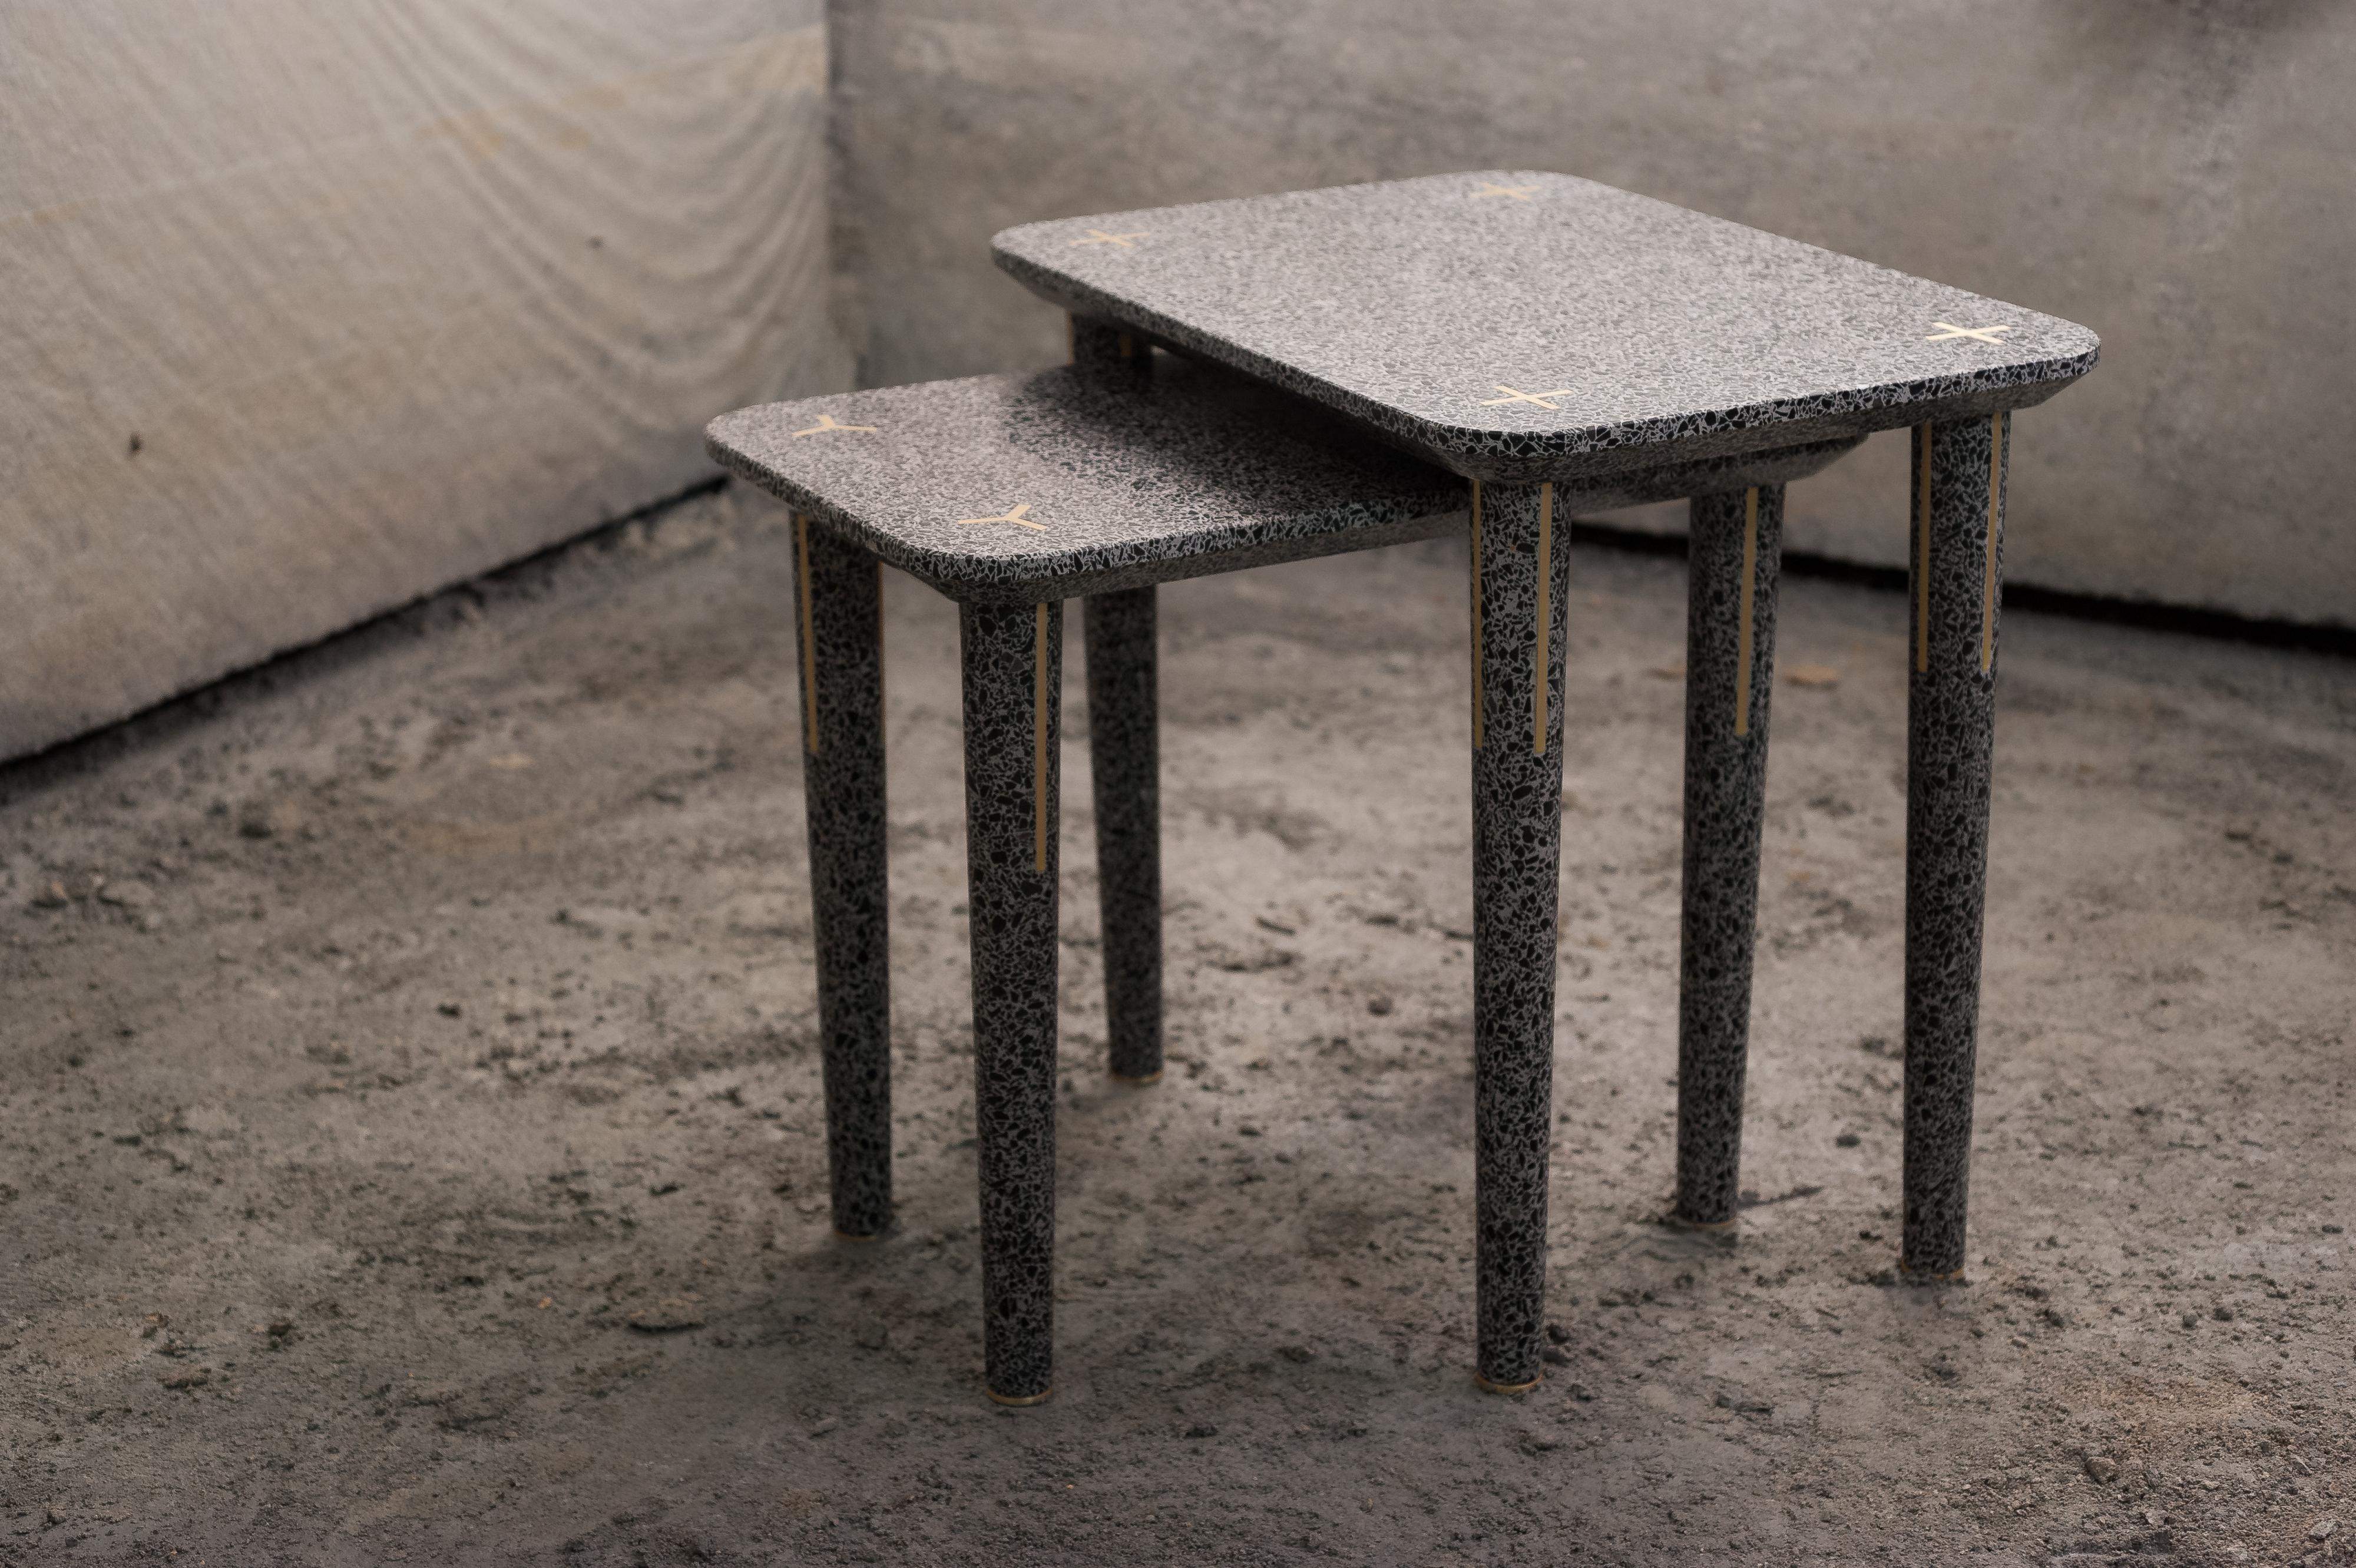 This unique design is one of two nesting tables that are part of the Flint collection. Crafted of terrazzo, a mix of cement and marble chips, its simple silhouette is adorned with metal inserts along the legs and on the top to mark the connections